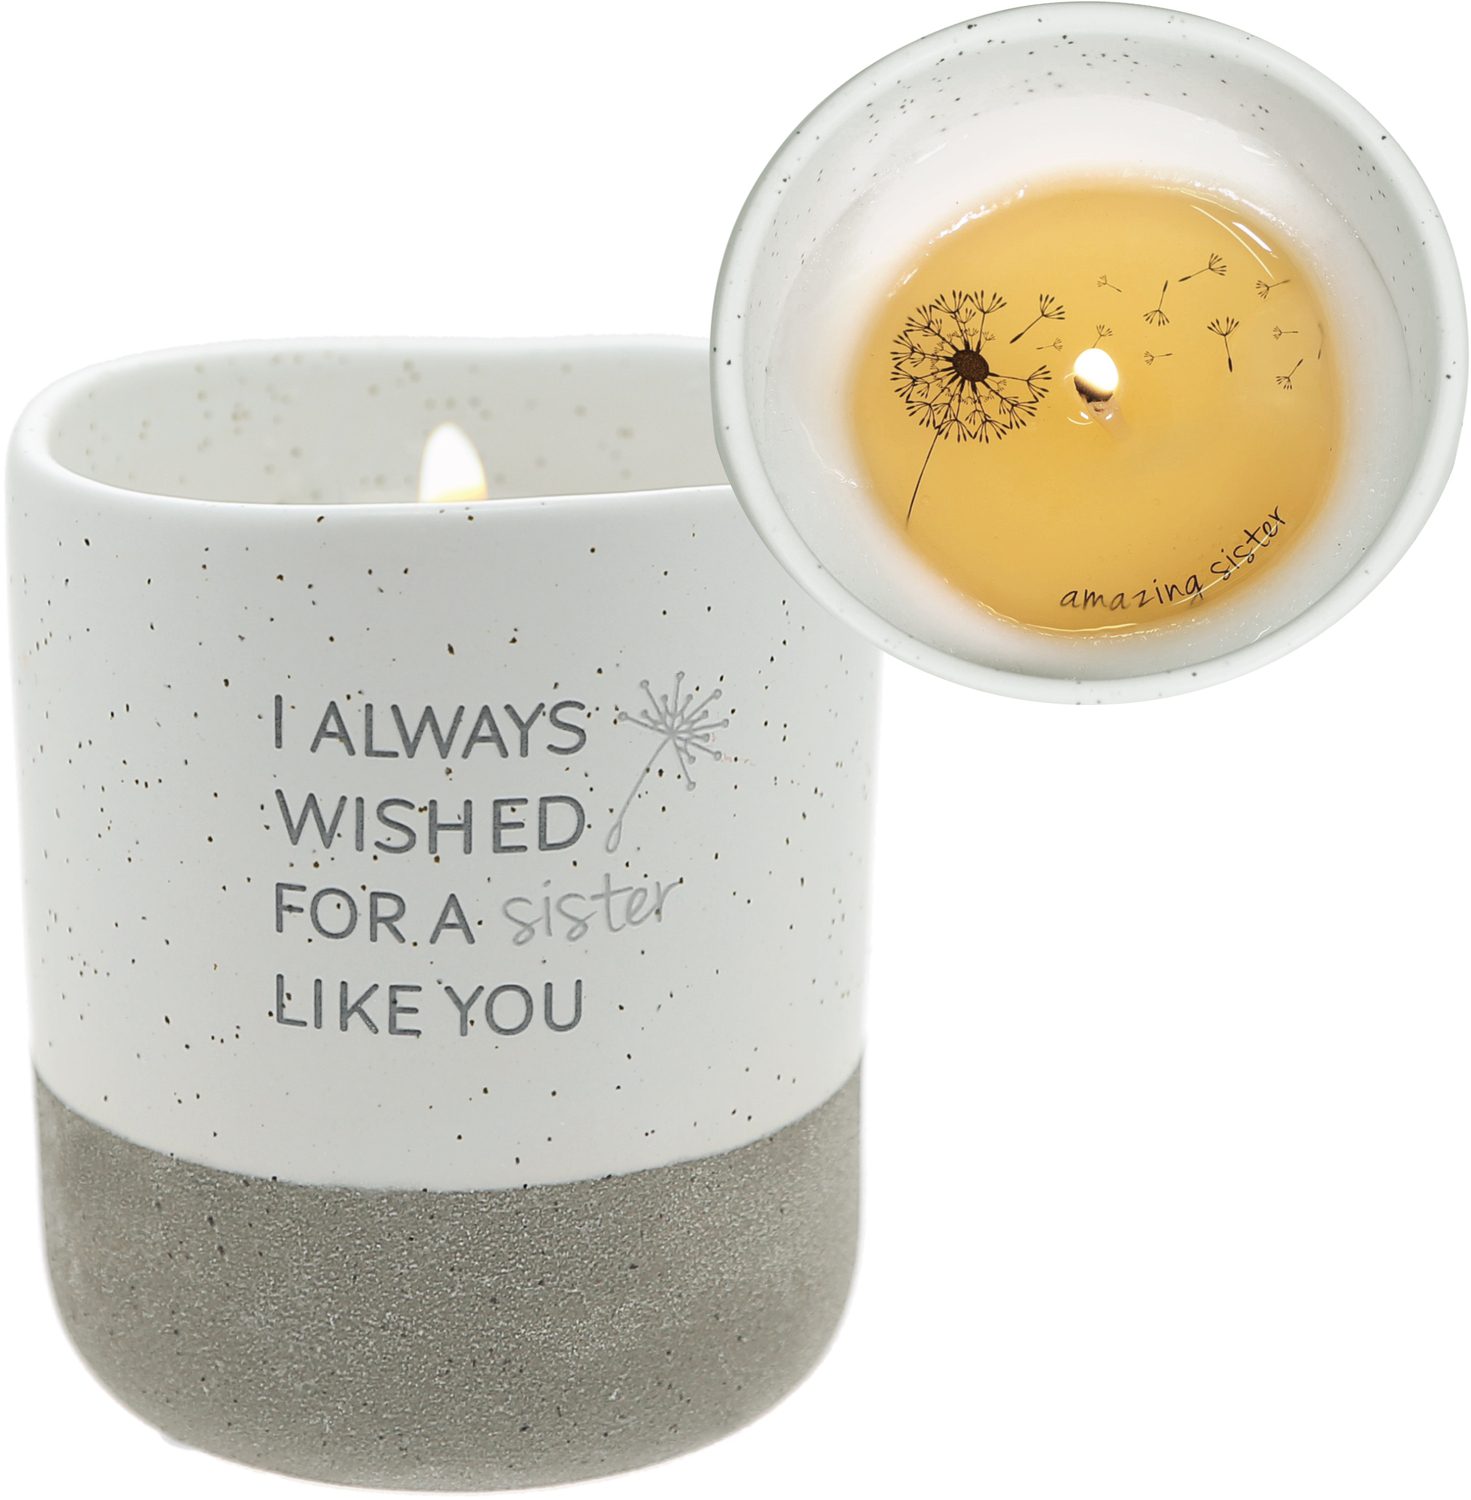 Sister Like You by I Always Wished - Sister Like You - 10 oz - 100% Soy Wax Reveal Candle
Scent: Tranquility